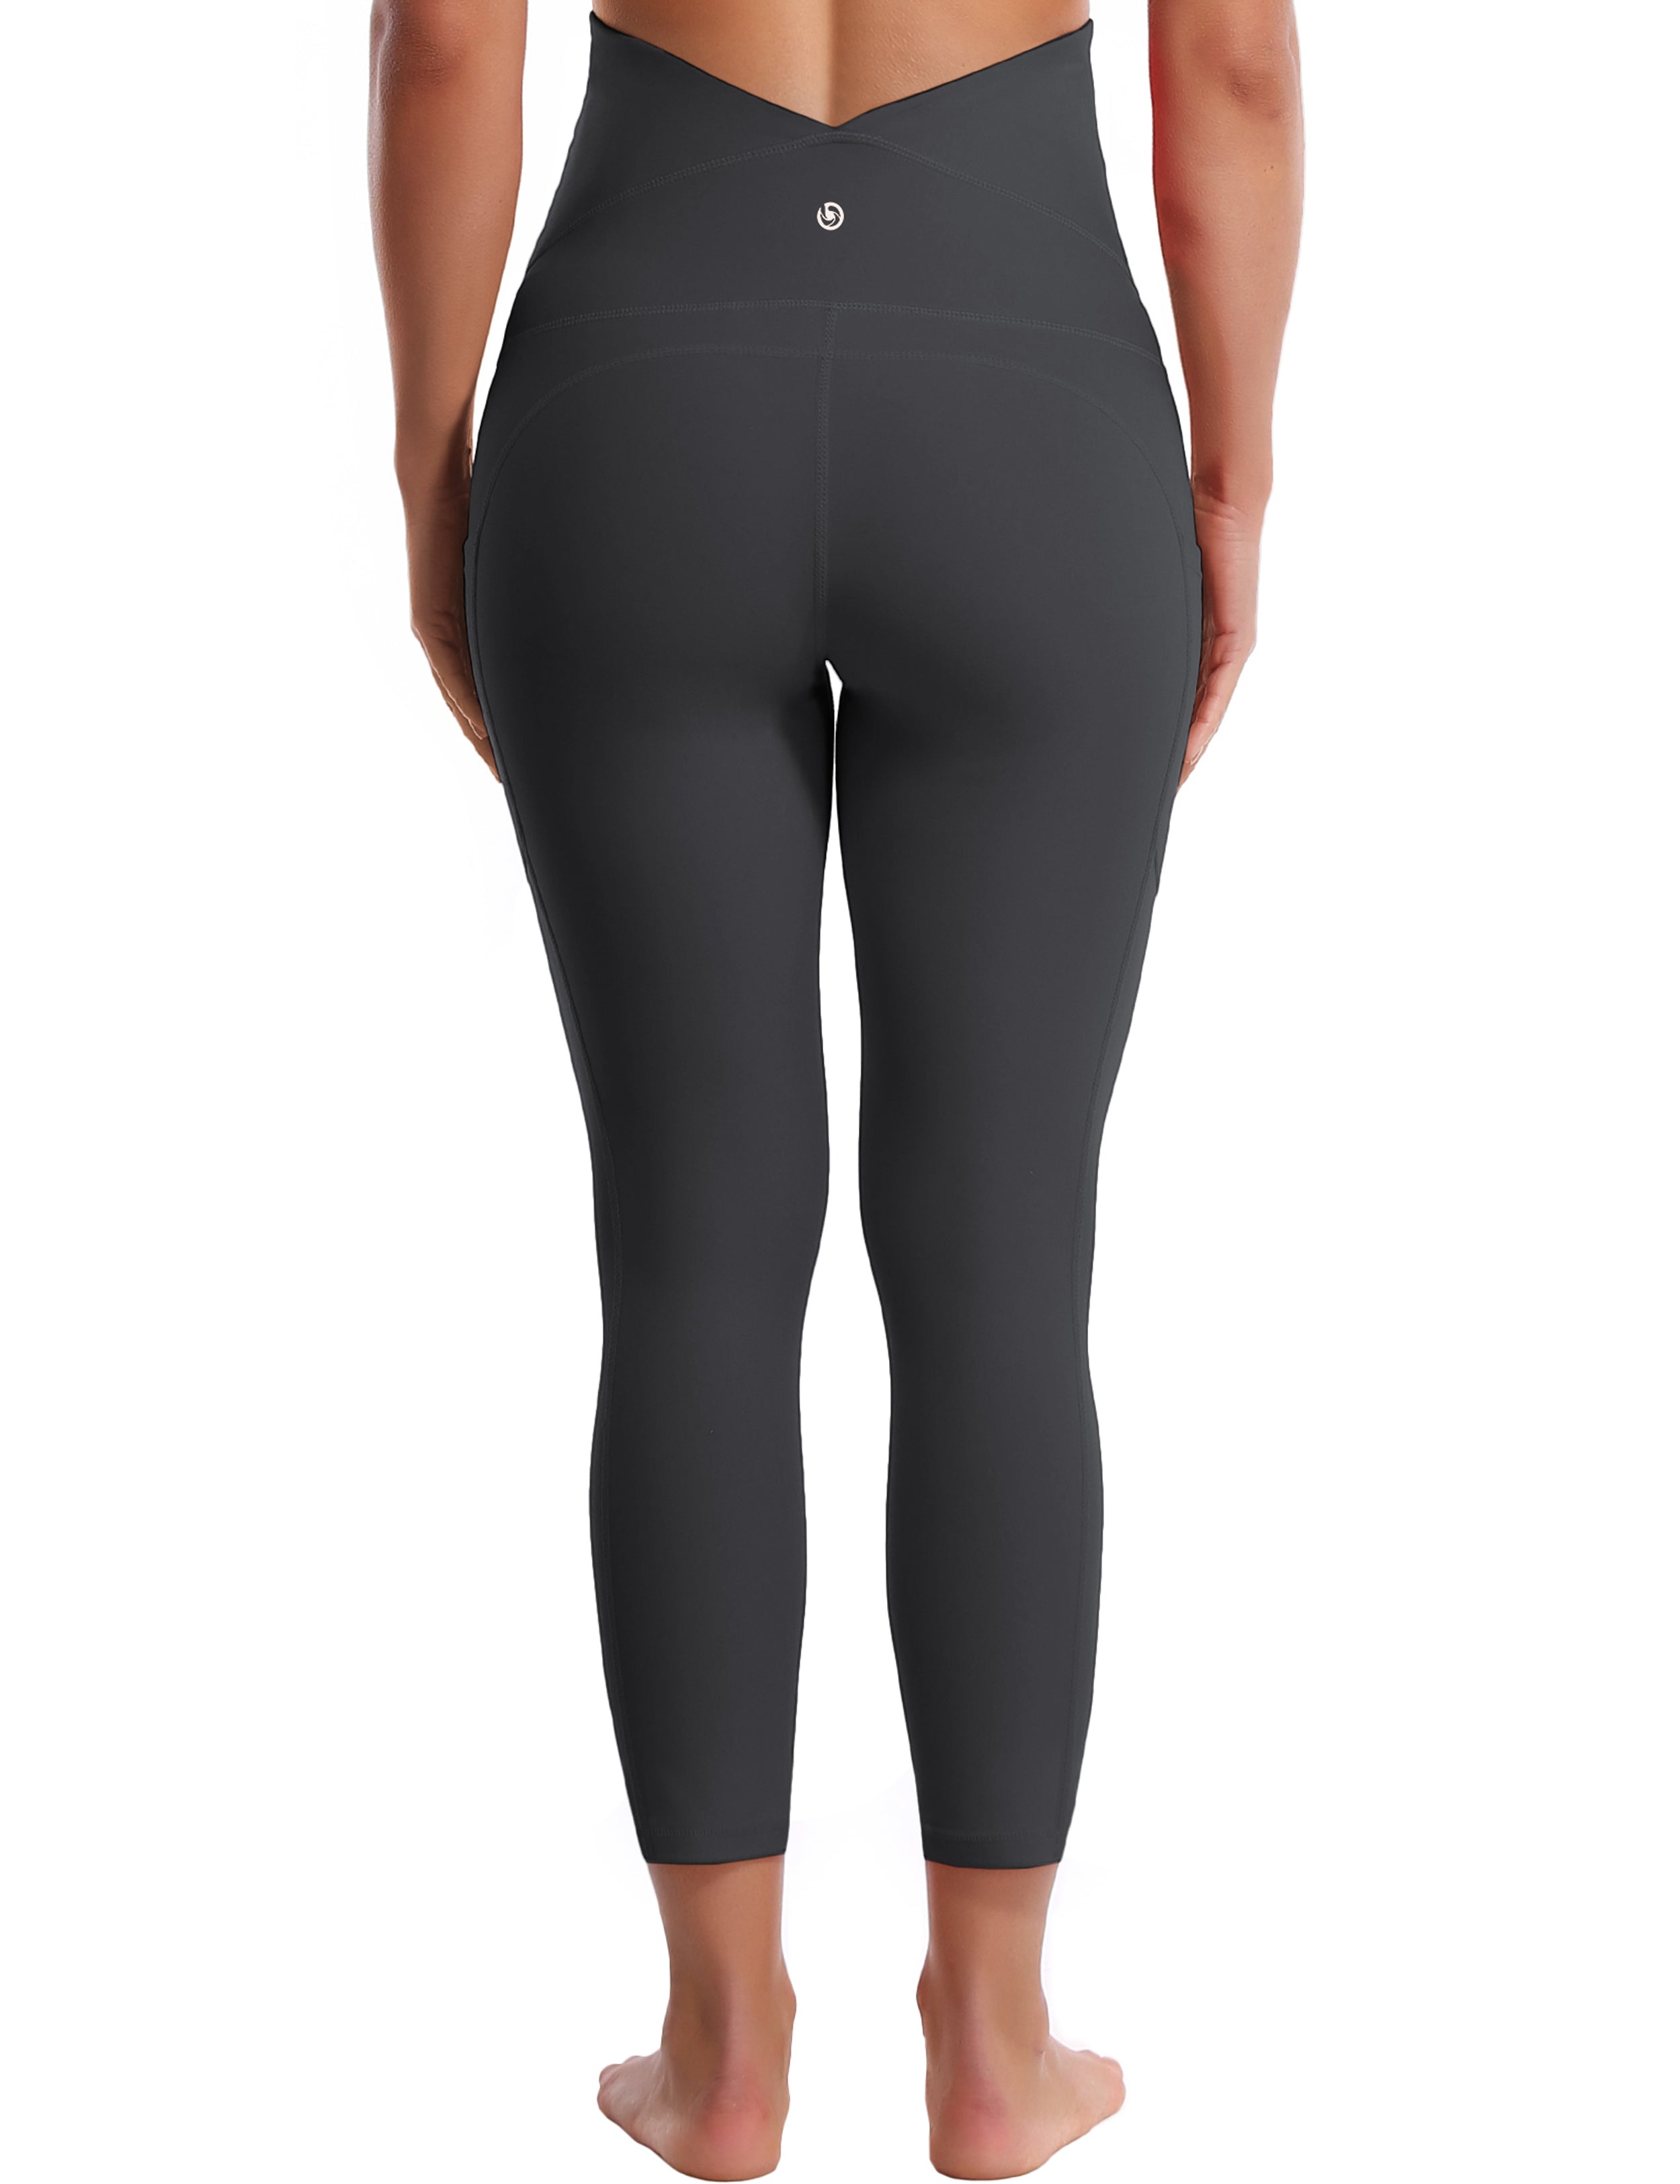 22" Side Pockets Maternity Yoga Pants shadowcharcoal 87%Nylon/13%Spandex Softest-ever fabric High elasticity 4-way stretch Fabric doesn't attract lint easily No see-through Moisture-wicking Machine wash